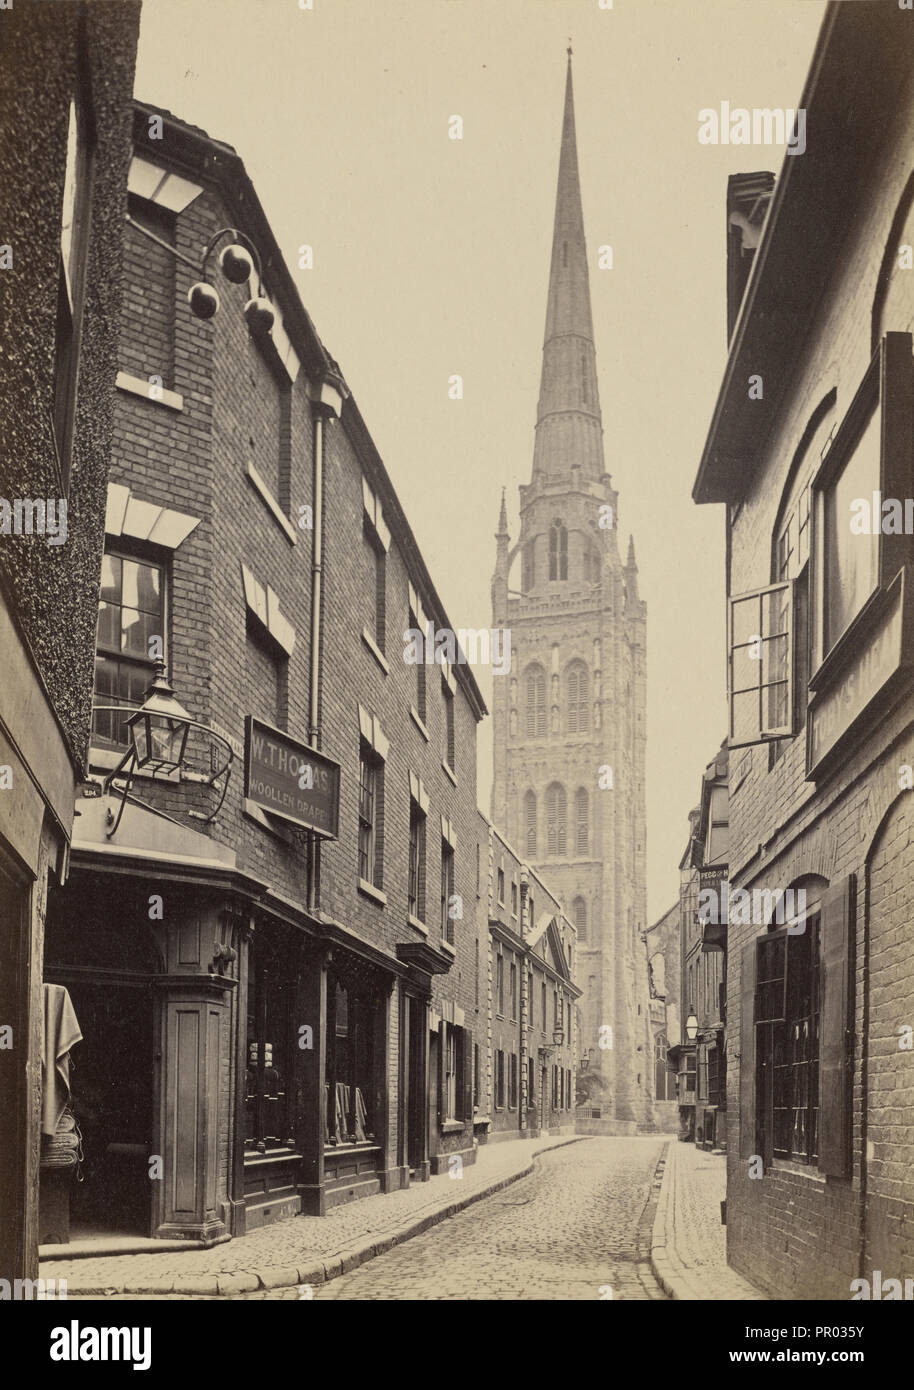 Coventry, tower and spire of St. Michael's; Francis Bedford, English, 1815,1816 - 1894, Chester, England; about 1860 - 1870 Stock Photo